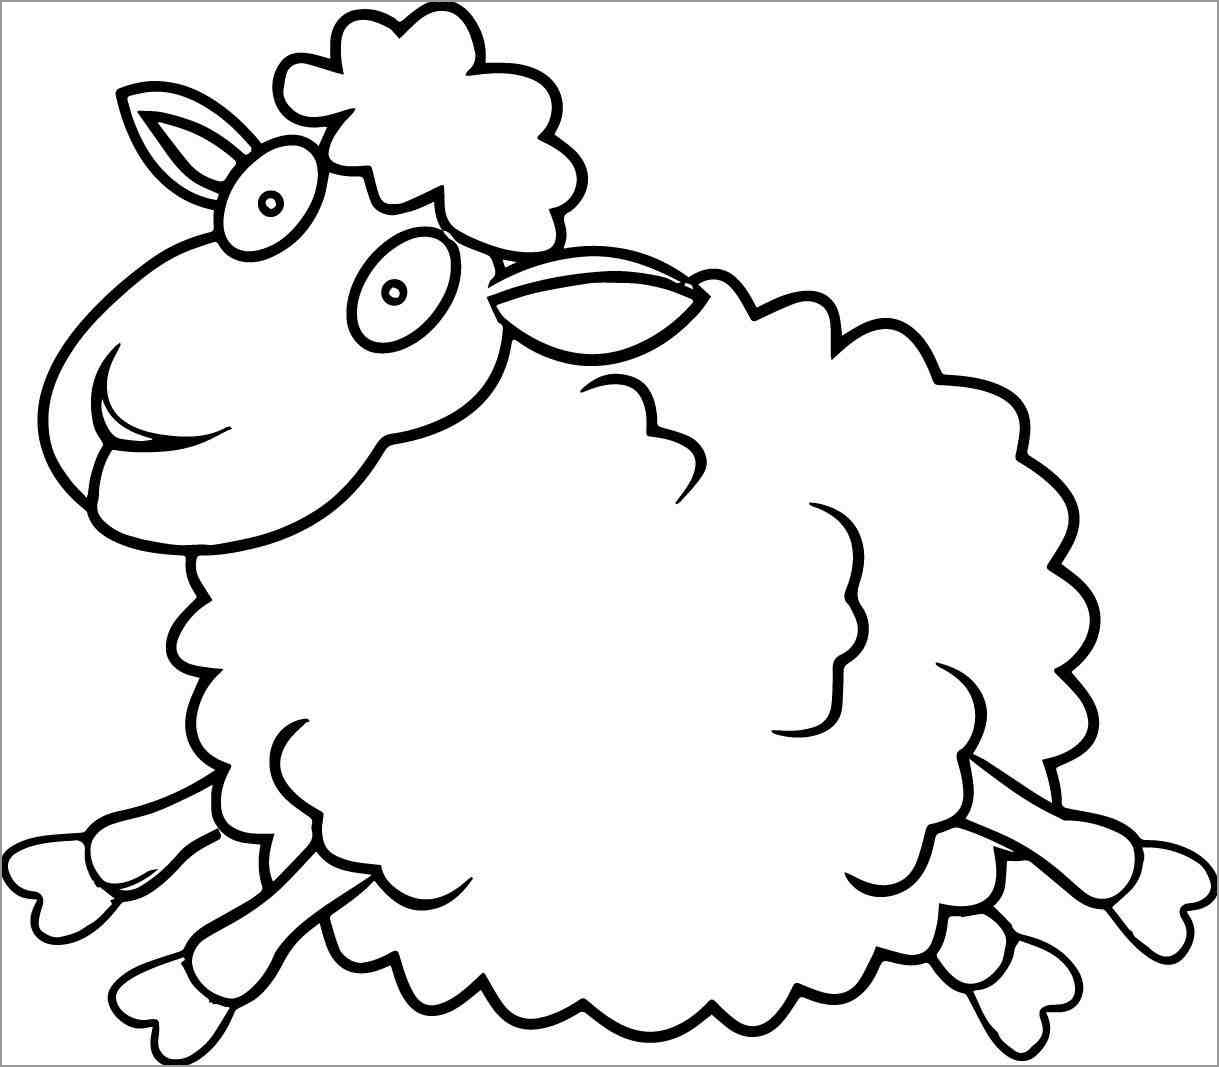 Sheep Coloring Pages - ColoringBay